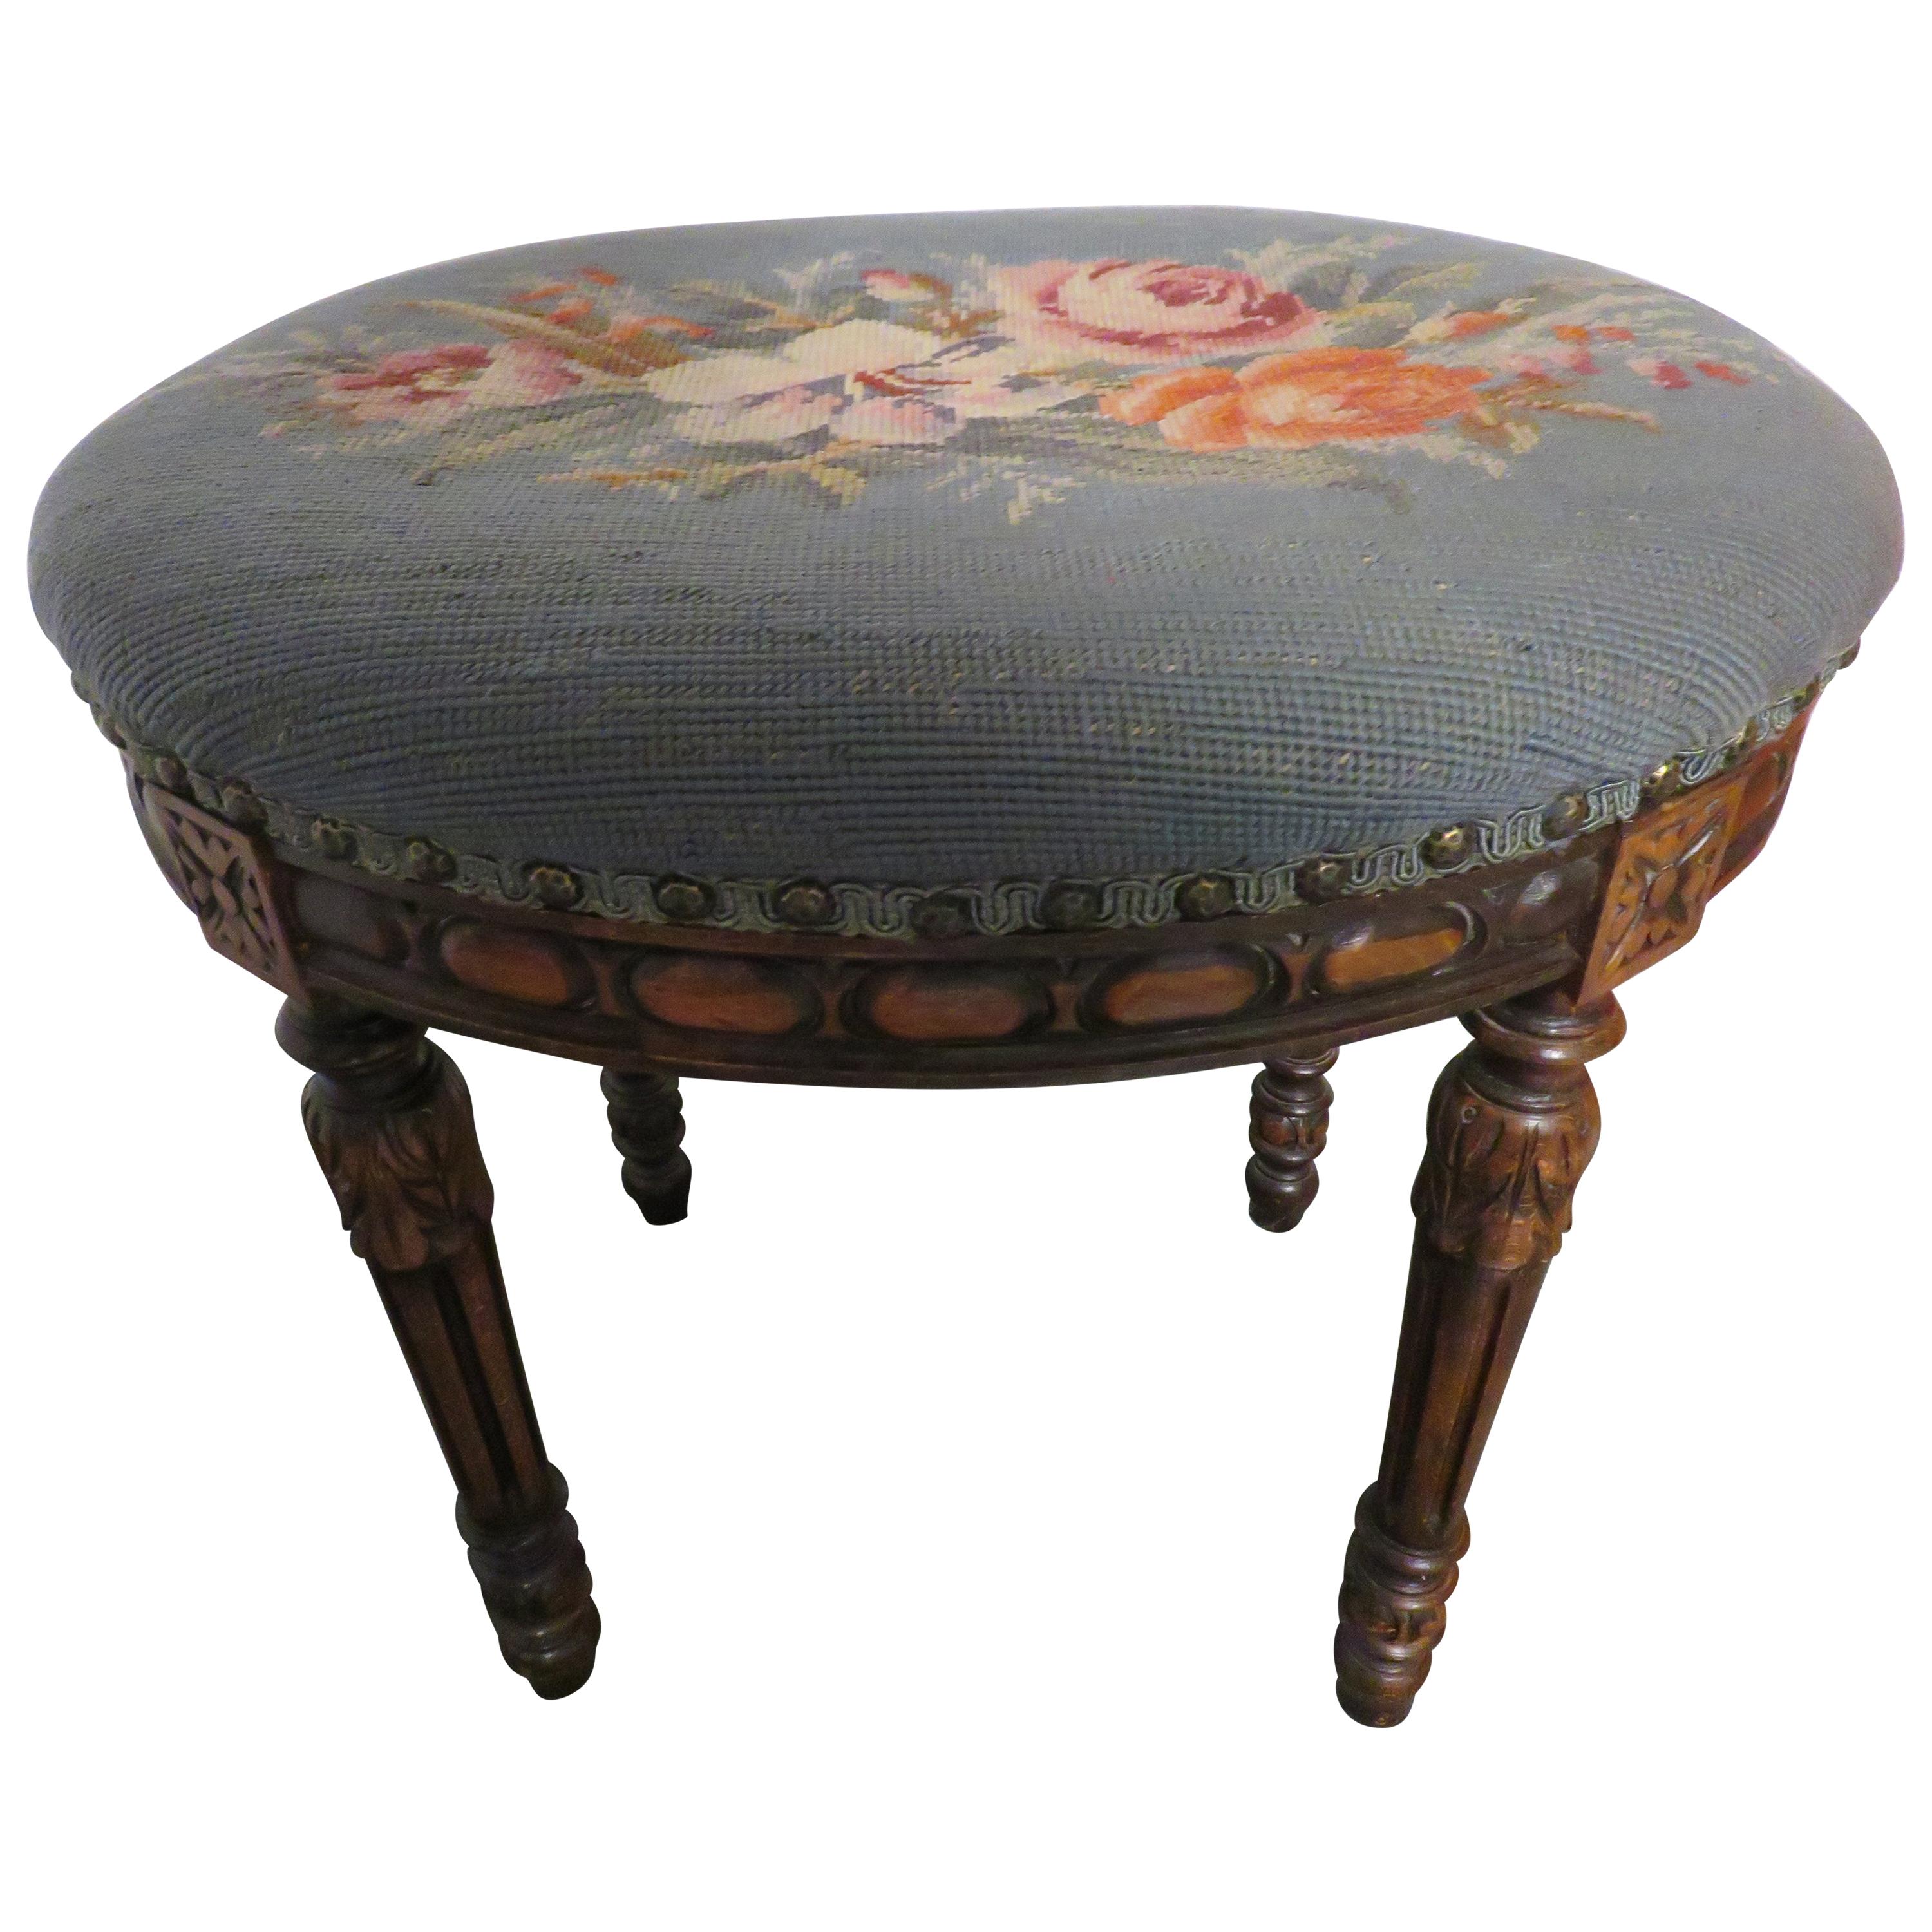 Lovely Louis XVI Oval Floral Needlepoint Stool Bench For Sale